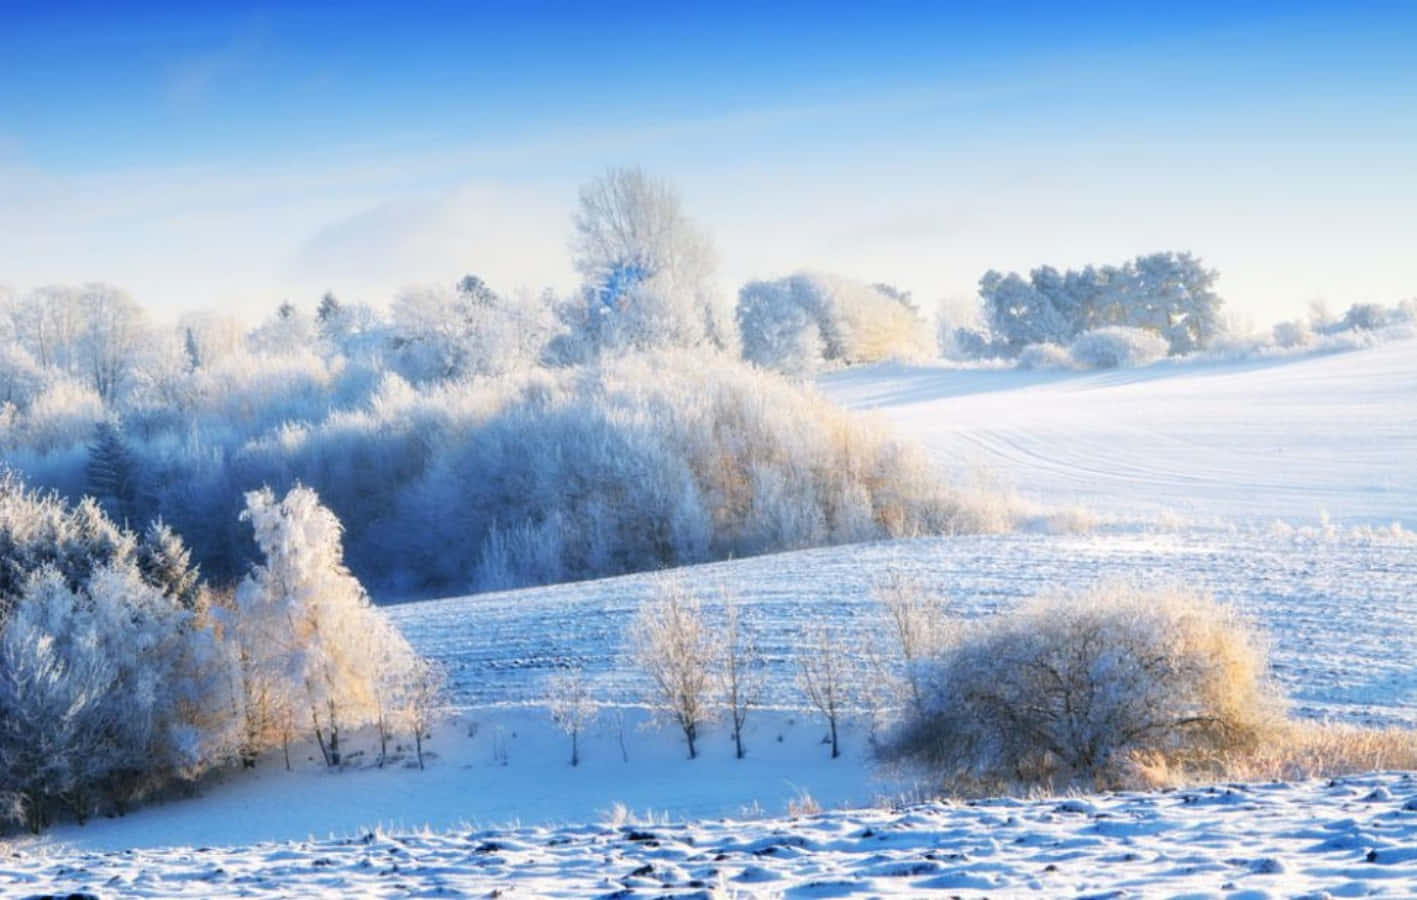 A beautiful scenic landscape of Winter season, with a picturesque light mist in the valley